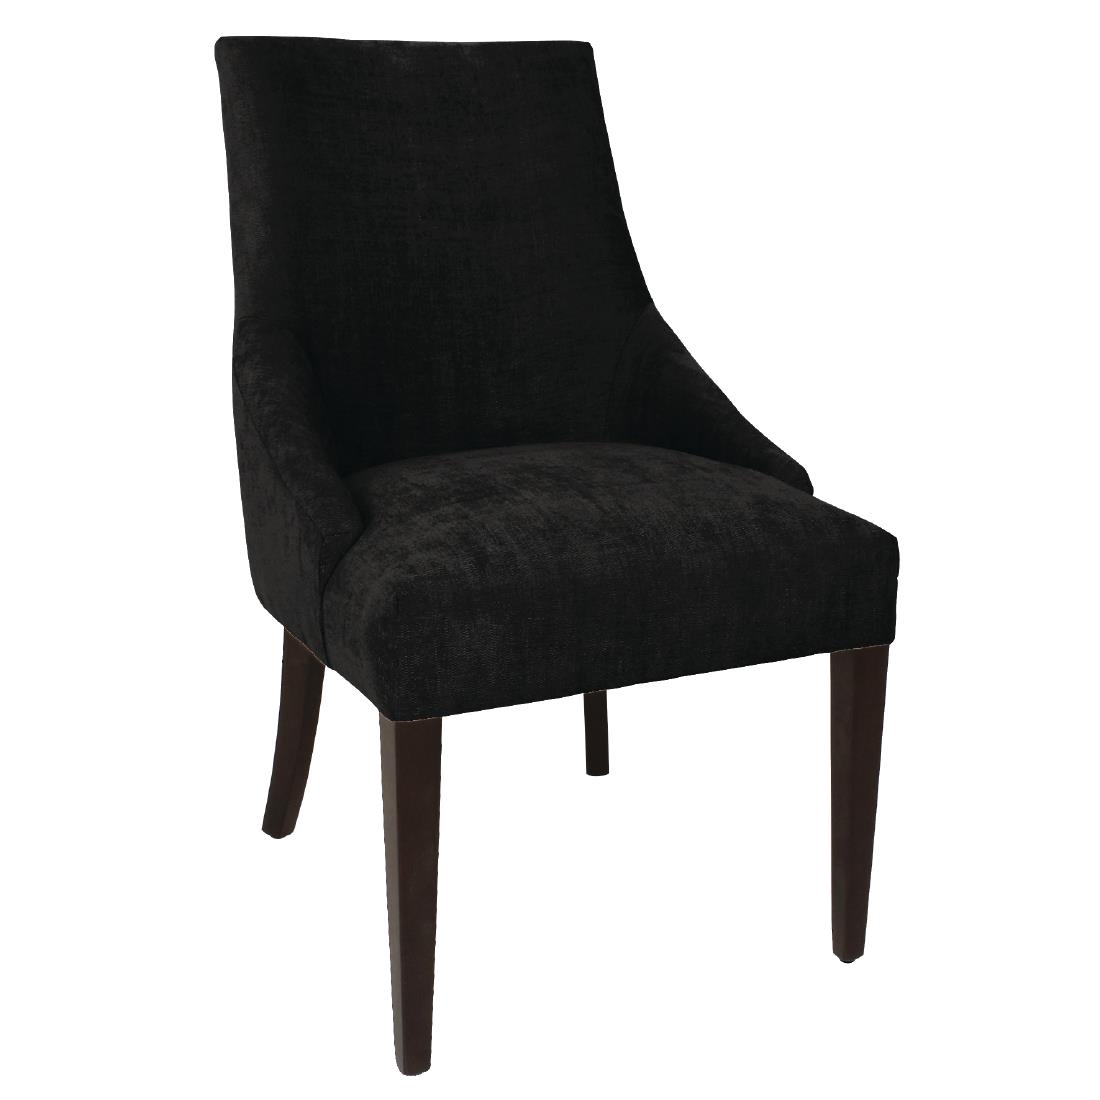 Finesse Dining Chair - Black